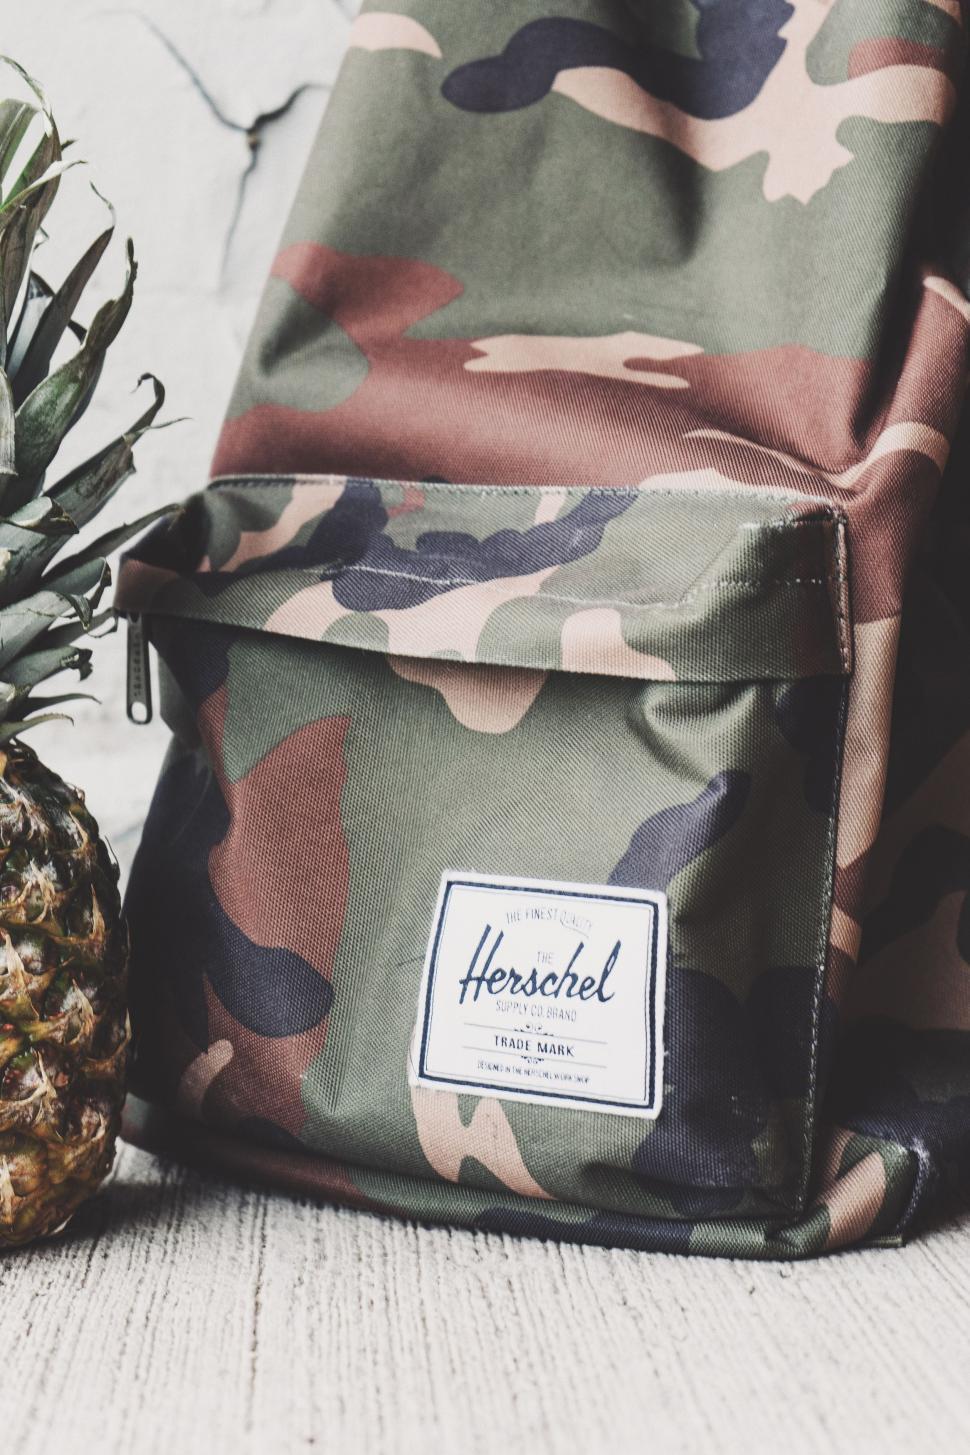 Free Image of Pineapple Sitting Next to Camouflage Backpack 